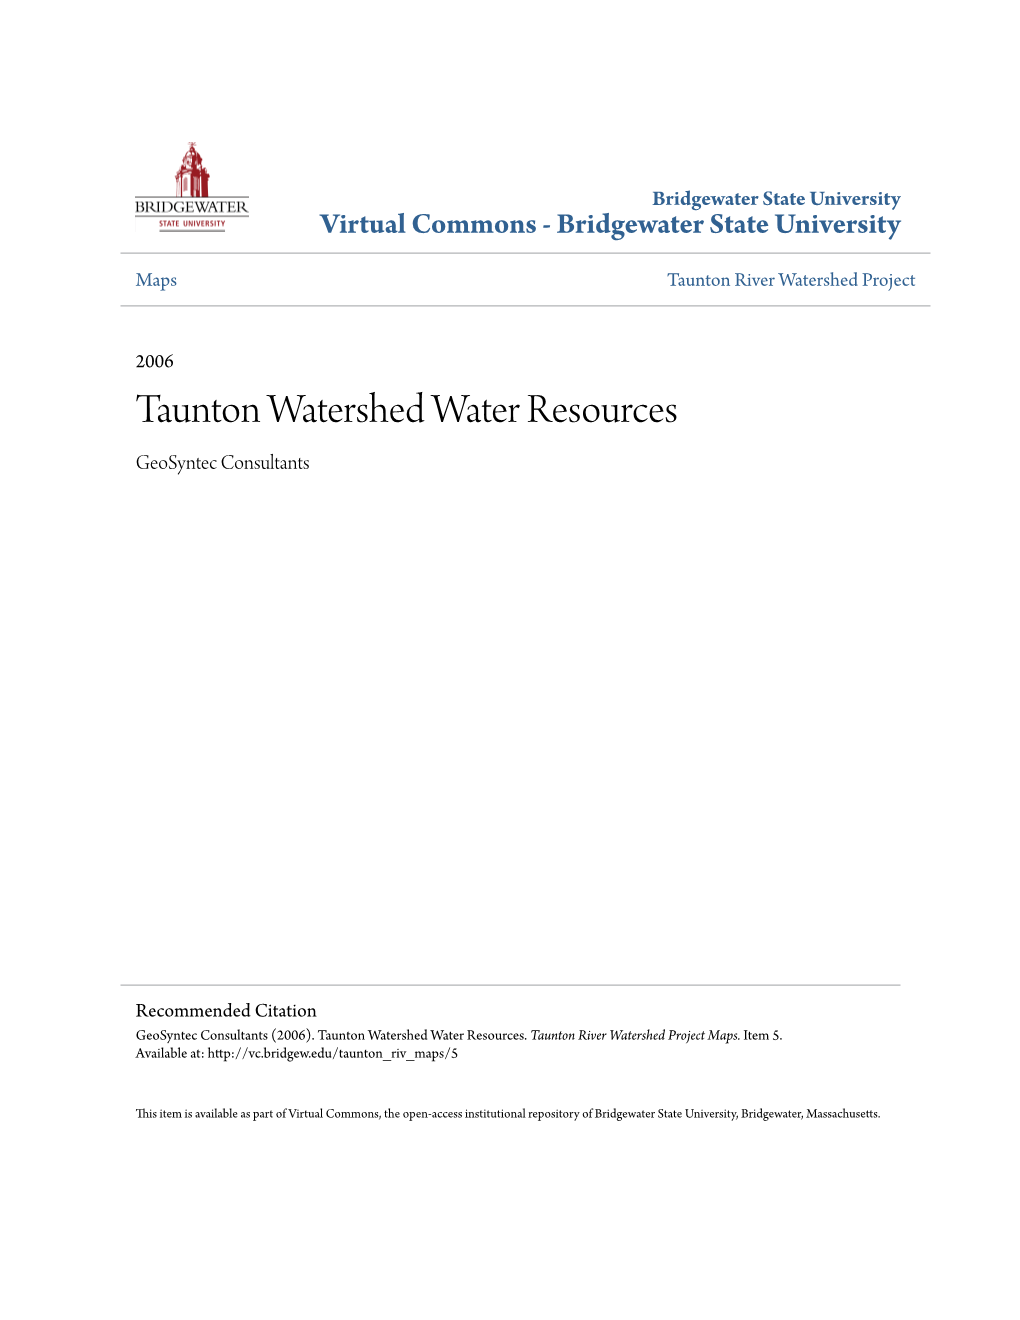 Taunton Watershed Water Resources Geosyntec Consultants